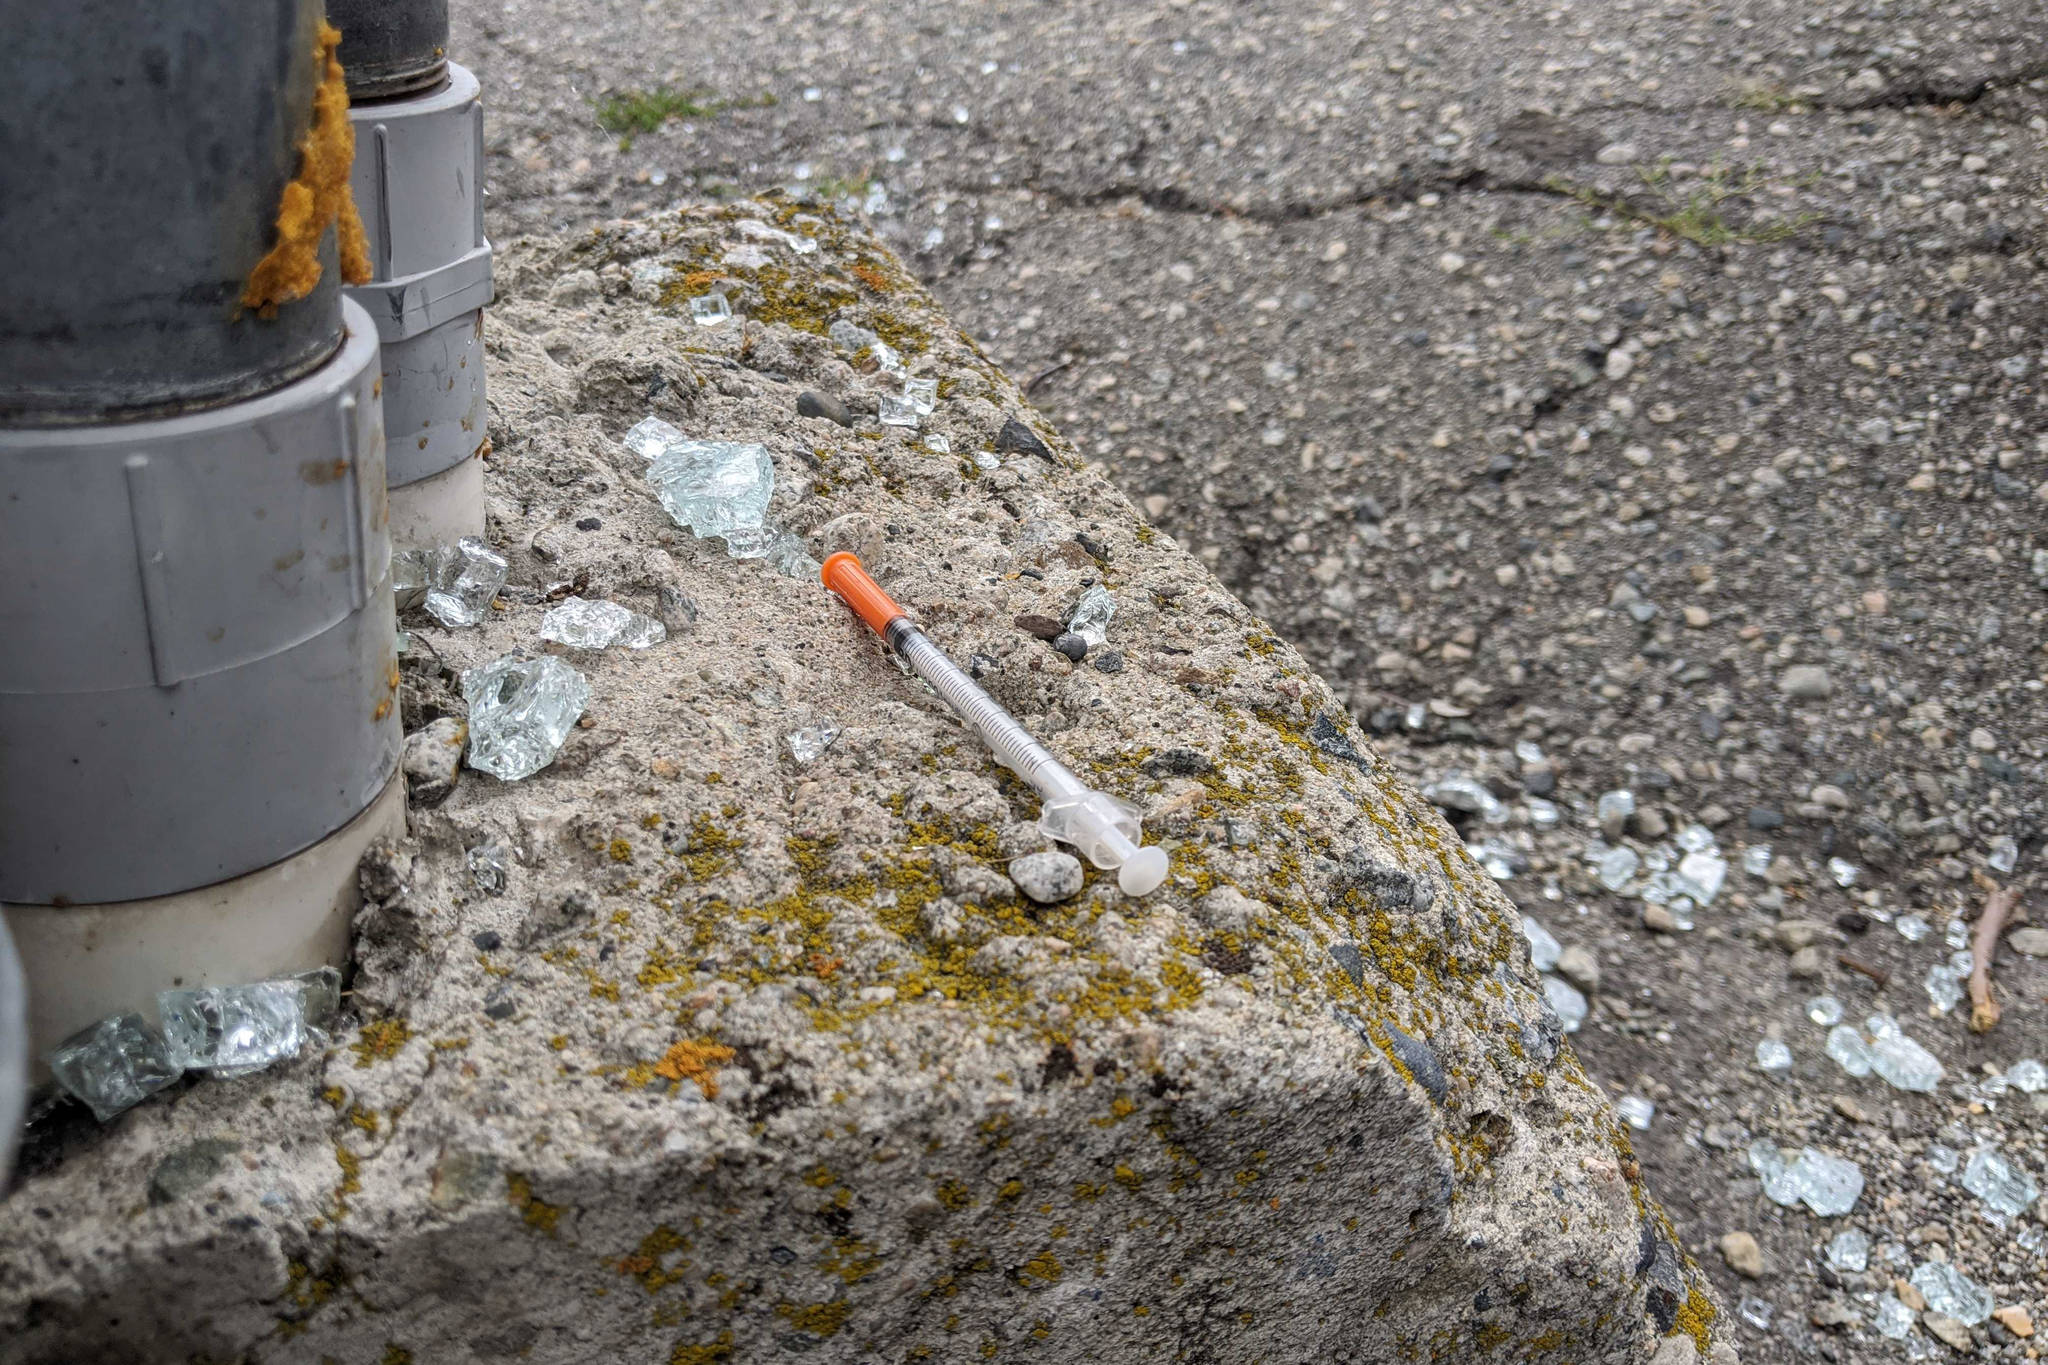 Data released by the B.C. Coroners Service Sept. 23, 2020 shows that the Okanagan is on pace to record more overdose deaths in 2020 than in 2019. (Jesse Day - Western News)